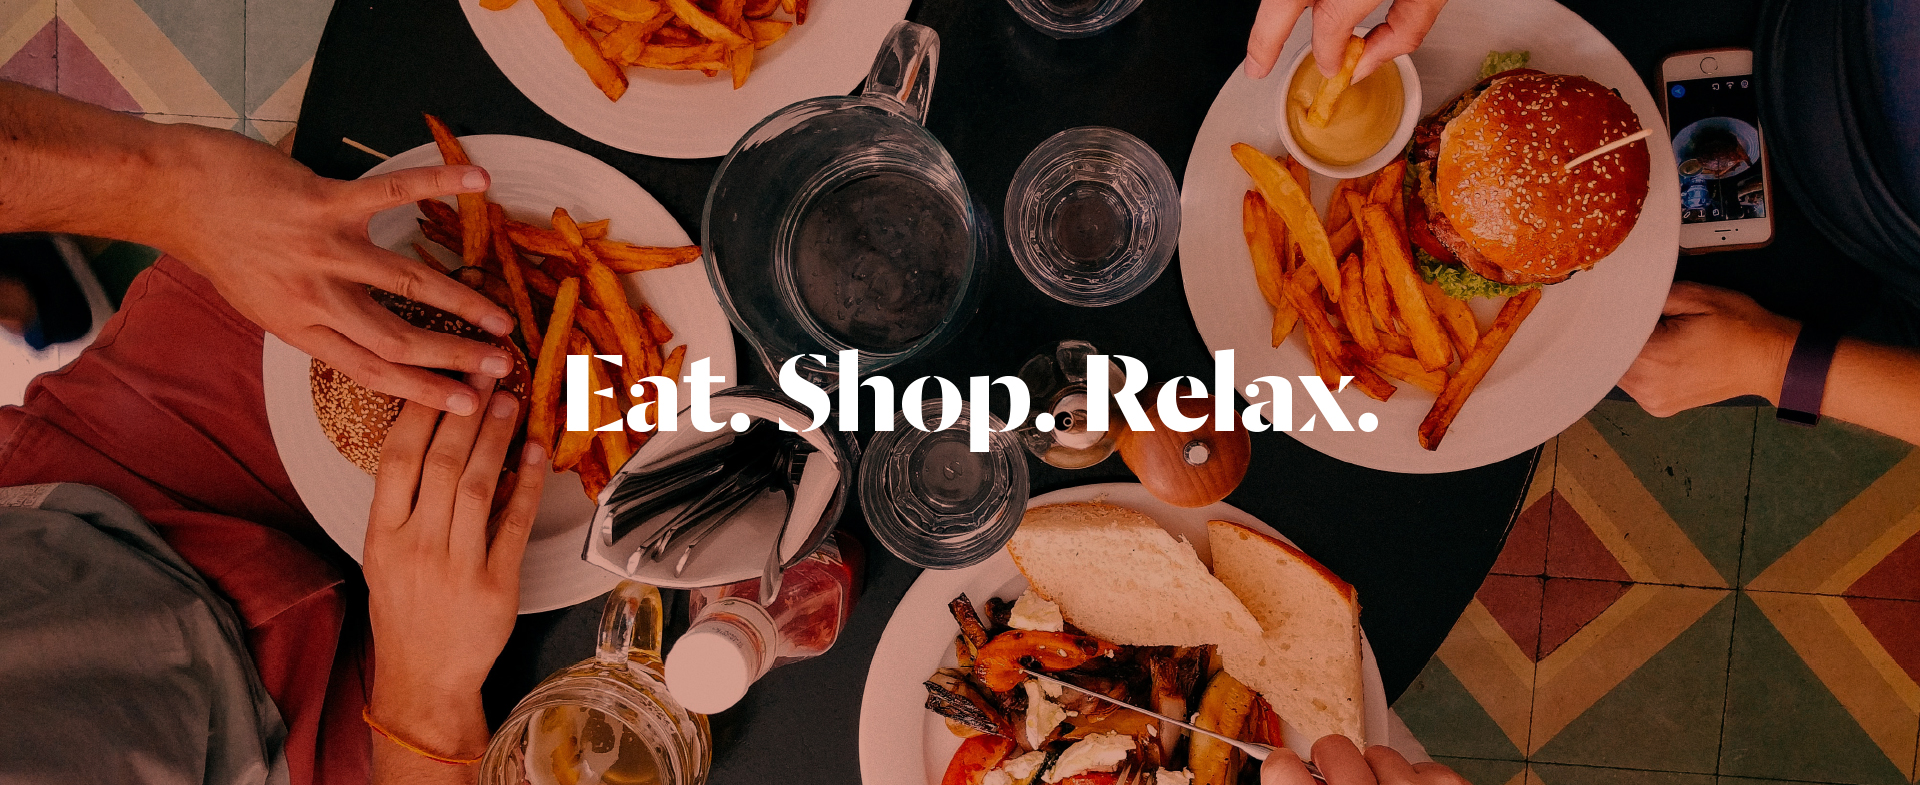 A photo taken from above of people eating and drinking. The table is laid with plates of burgers and chips and glasses of water. Text over the image says Eat. Shop. Relax.